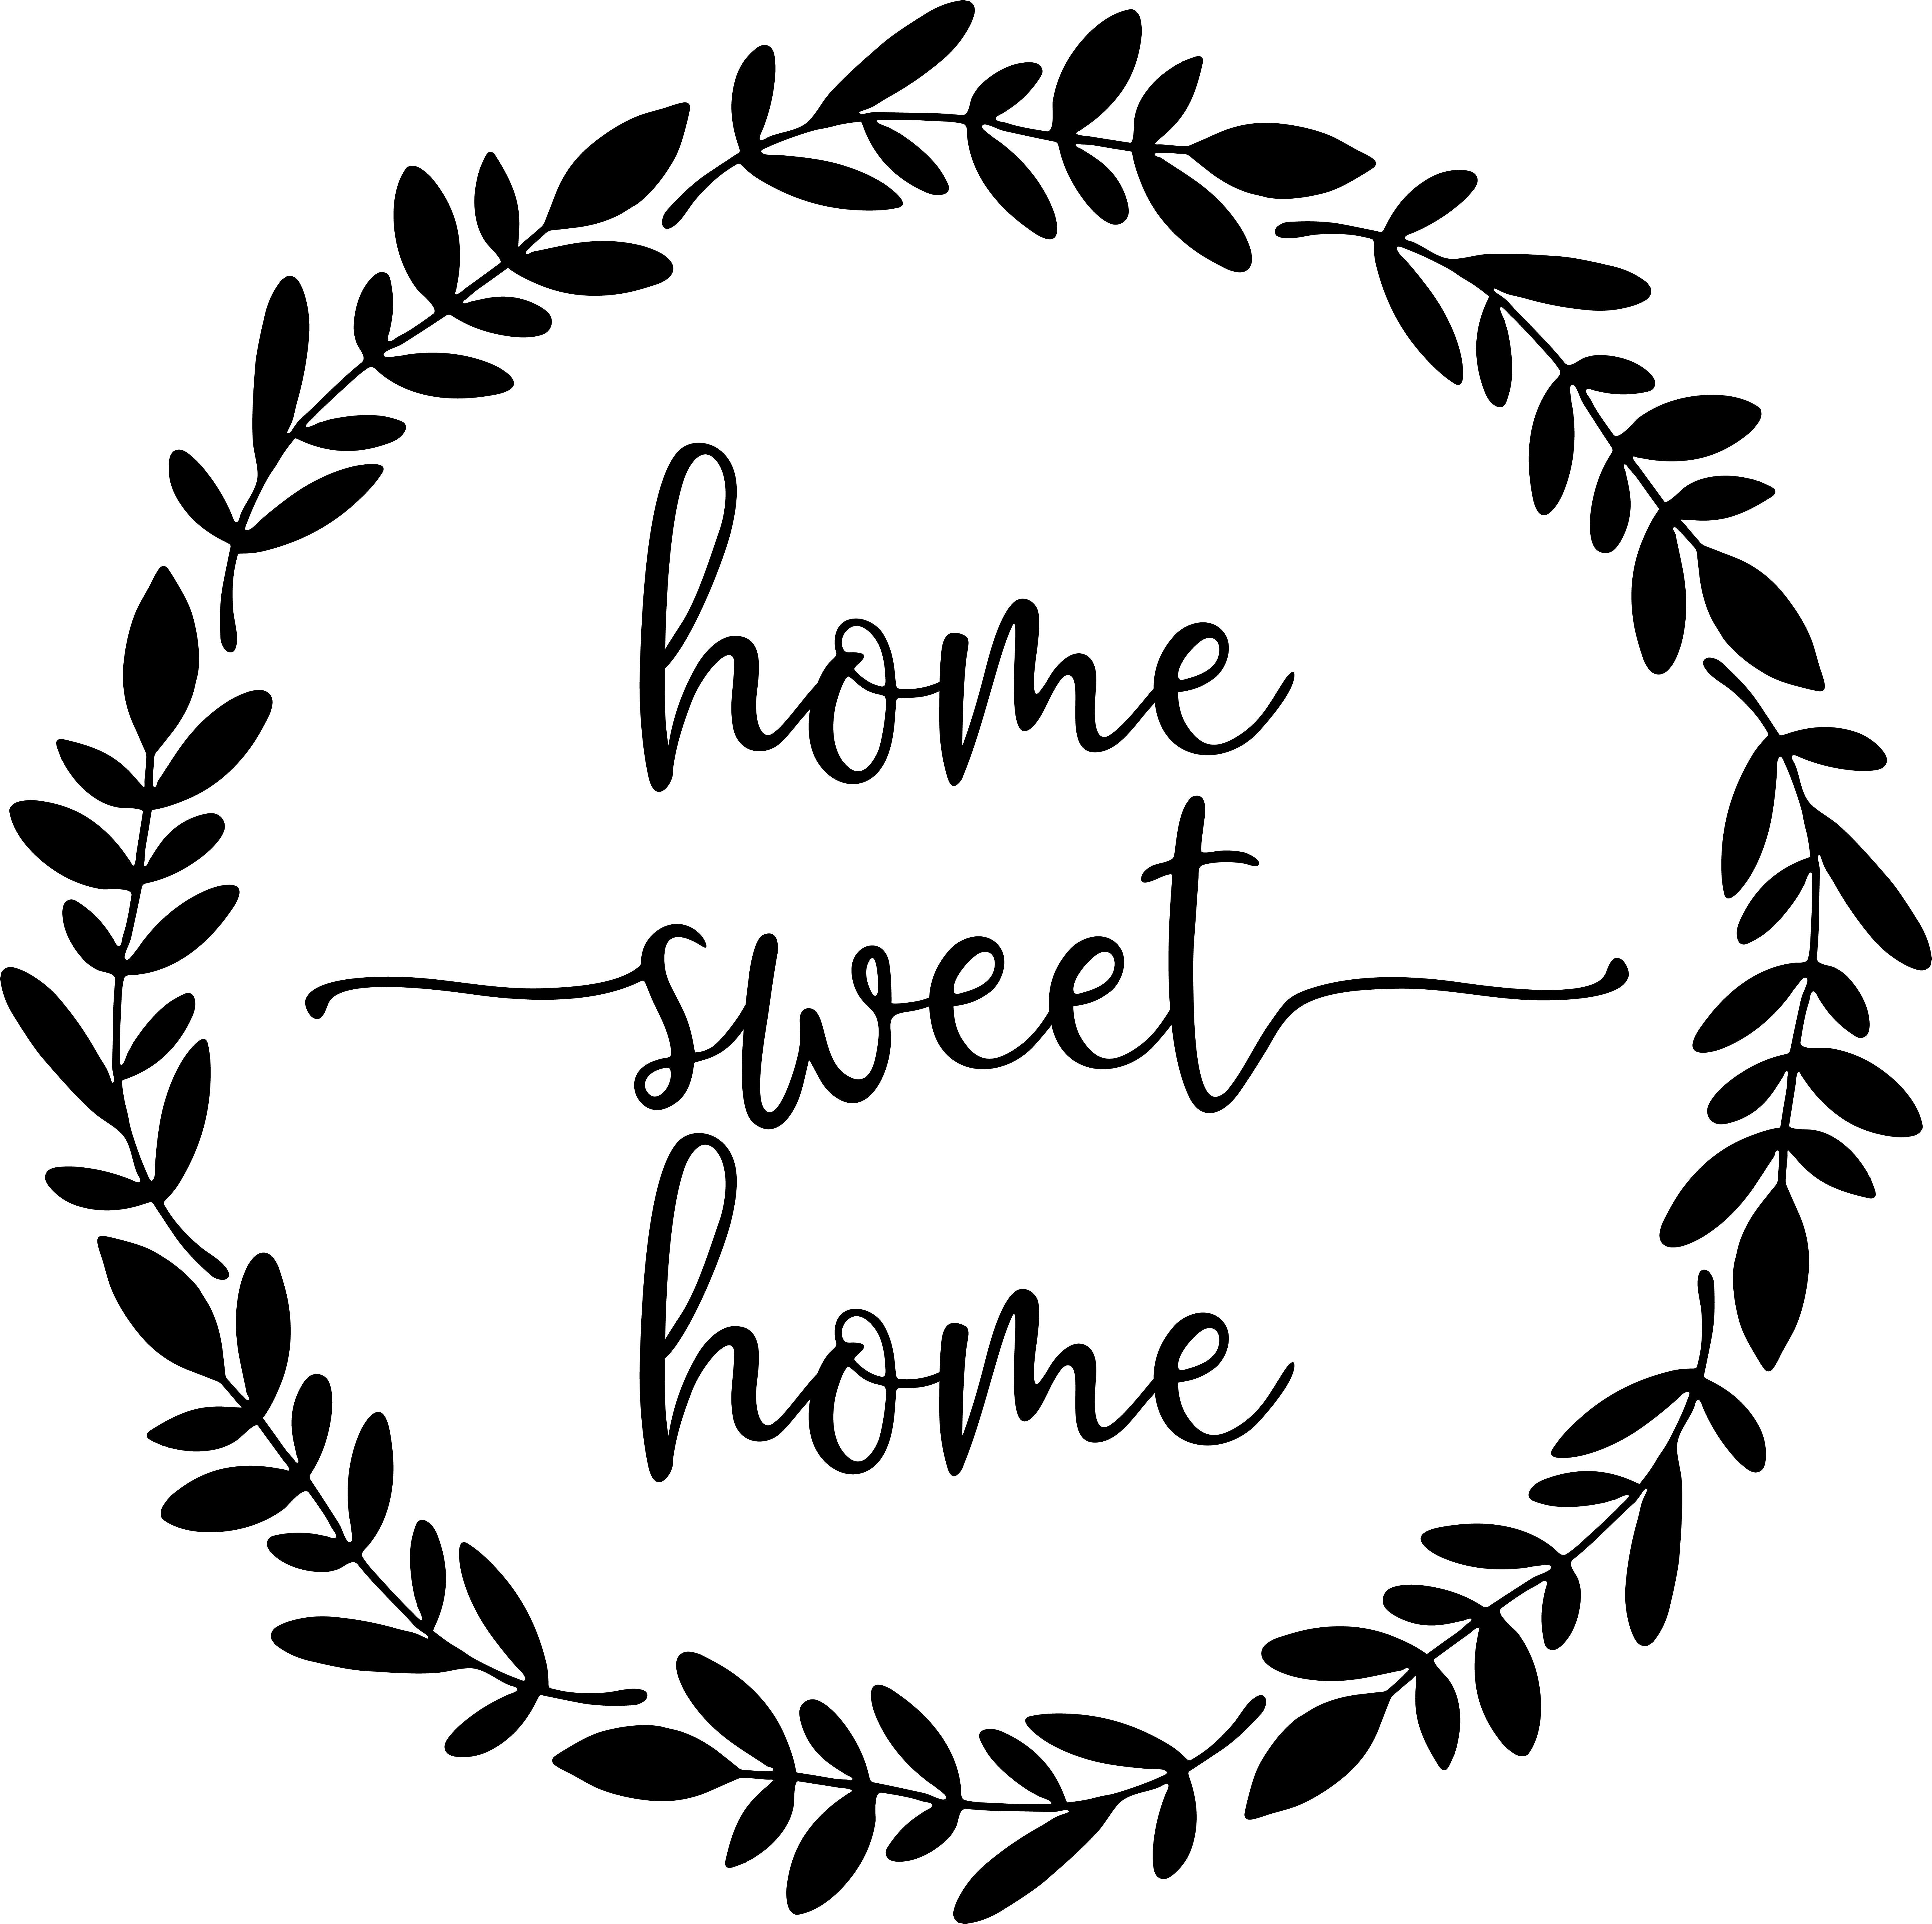 AH010 - Home Sweet Home | The Painted Bench Hamilton